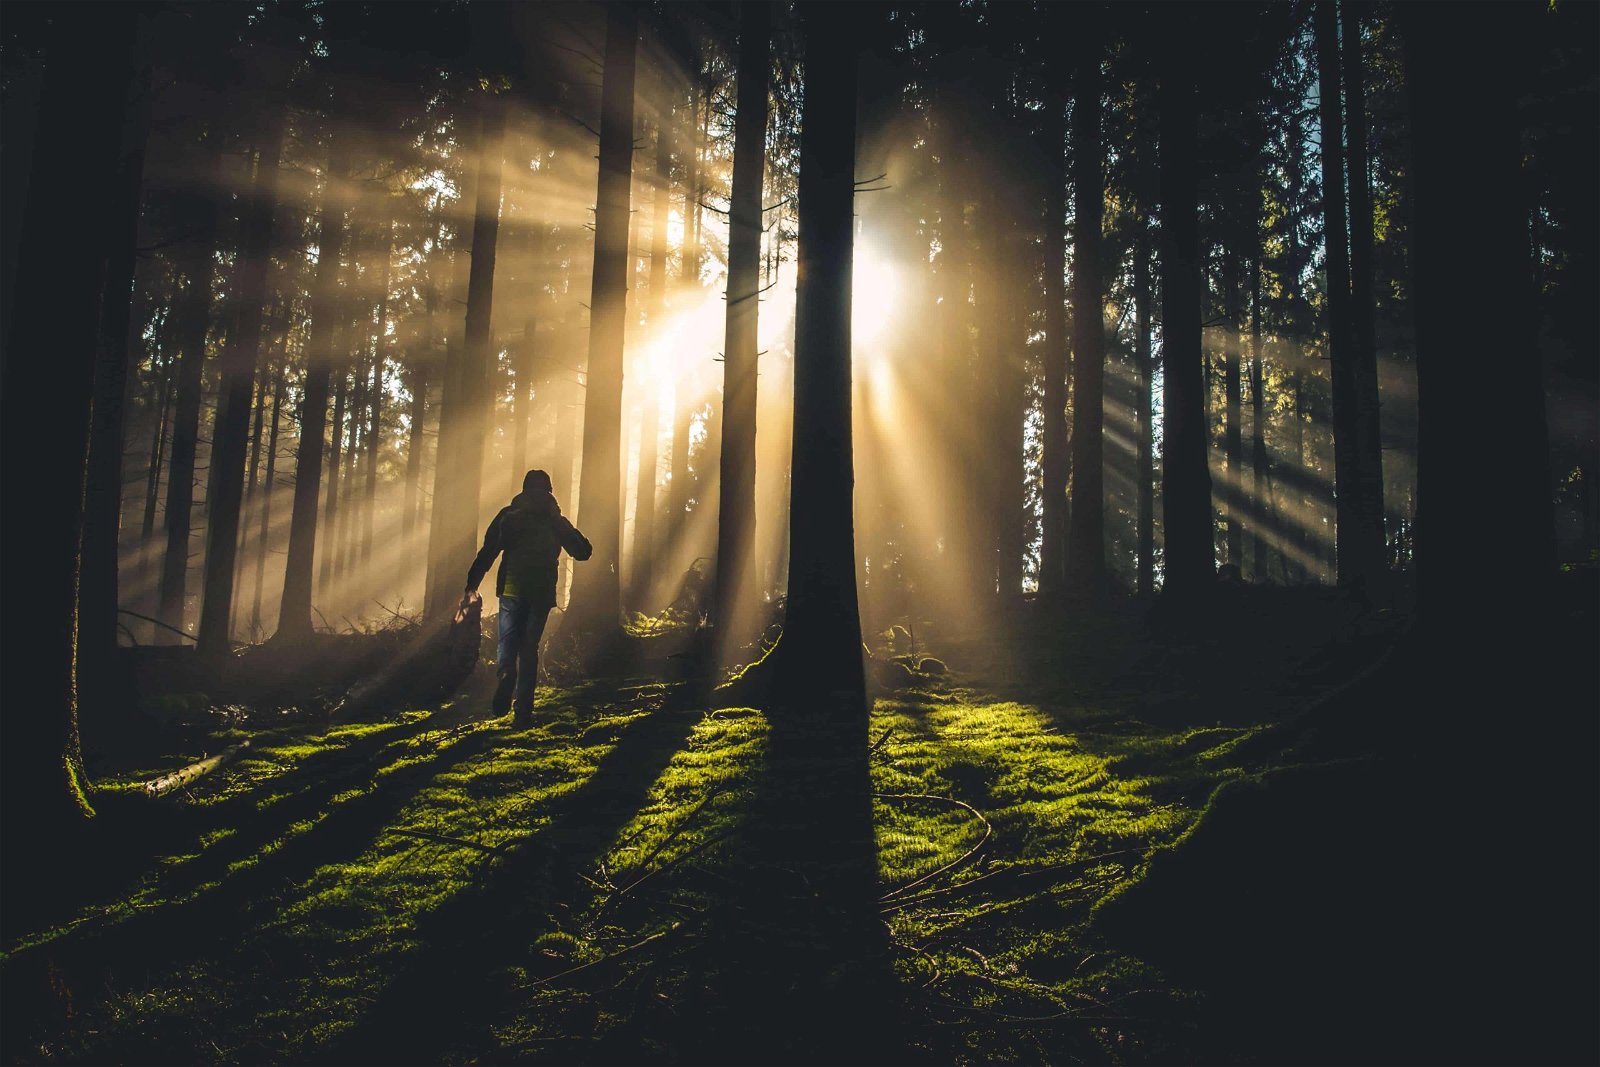 Natural Light Photography includes hard light which creates dramatic shadows, such as those created by the setting sun shining through the woods.